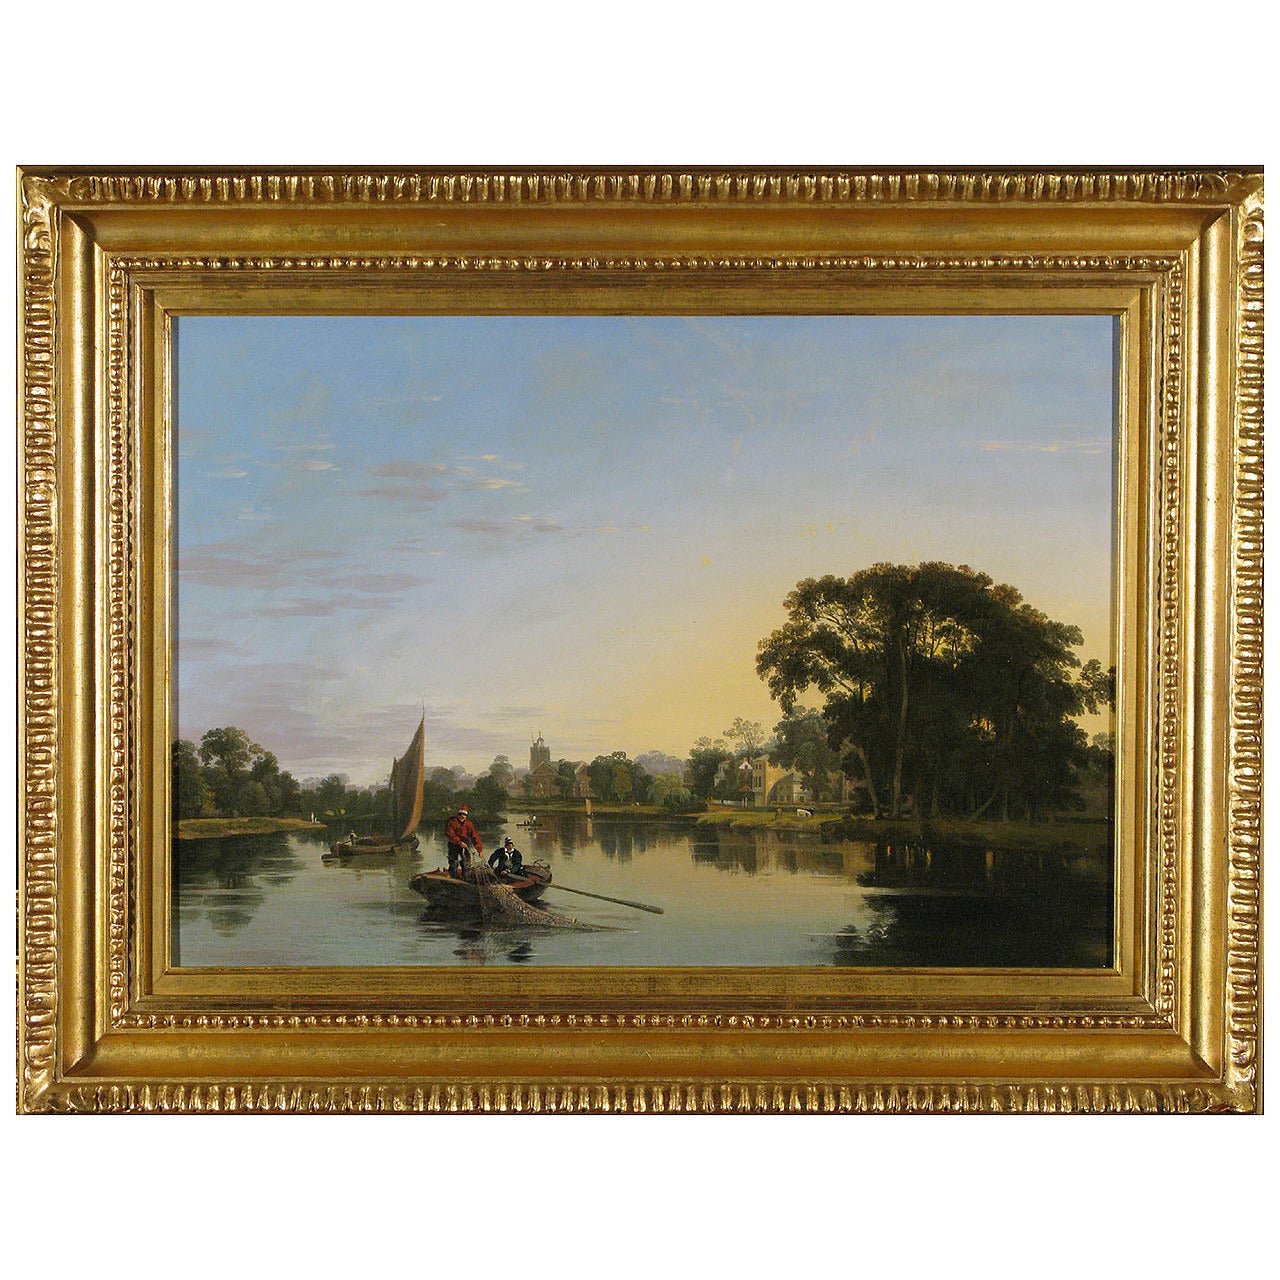 "The View on the Thames at Twickenham" Painting